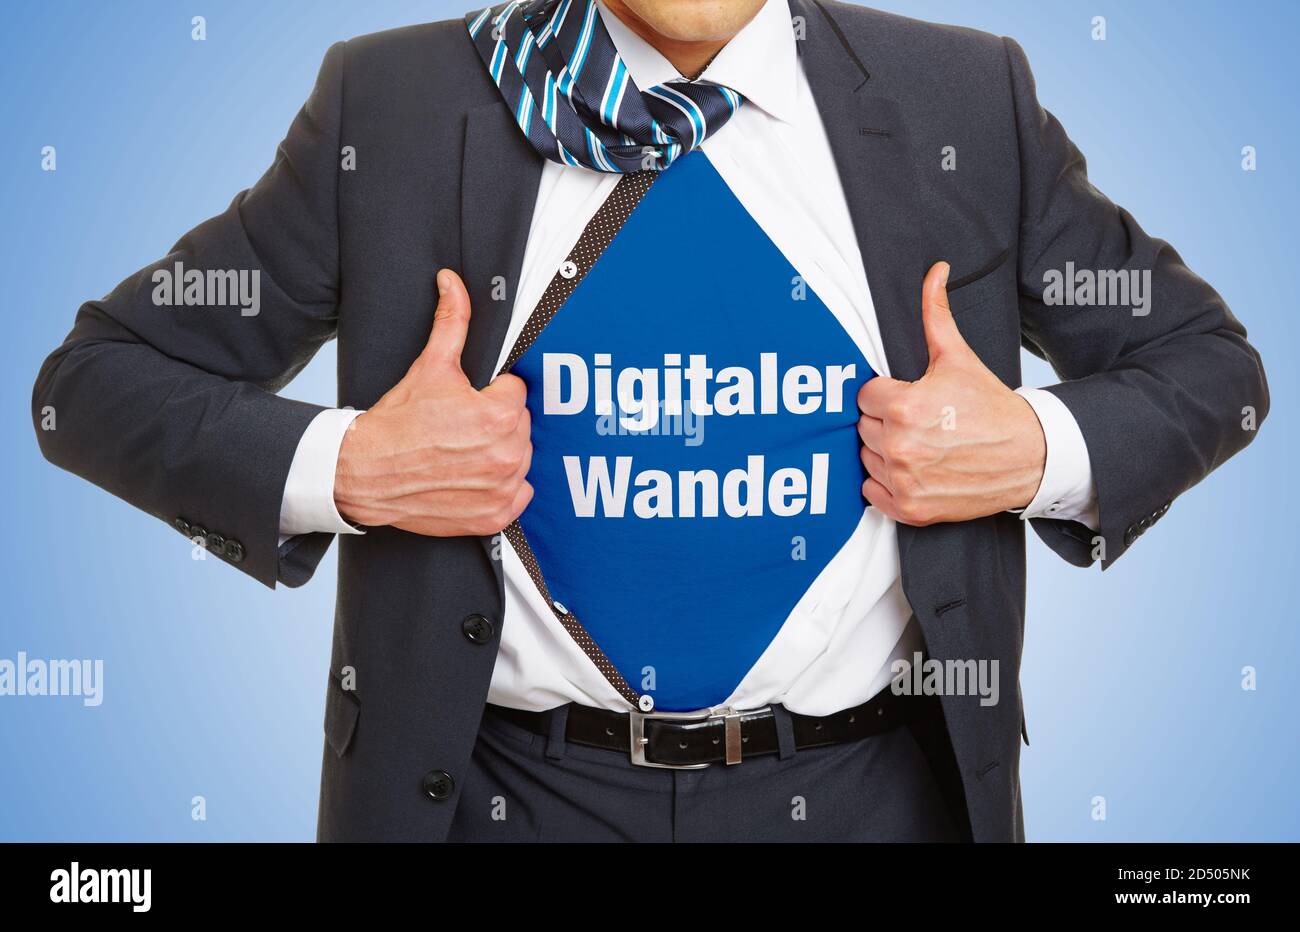 Man in a suit opens his shirt and bears the lettering Digitaler Wandel (German for: digital change) underneath as a digitization concept Stock Photo